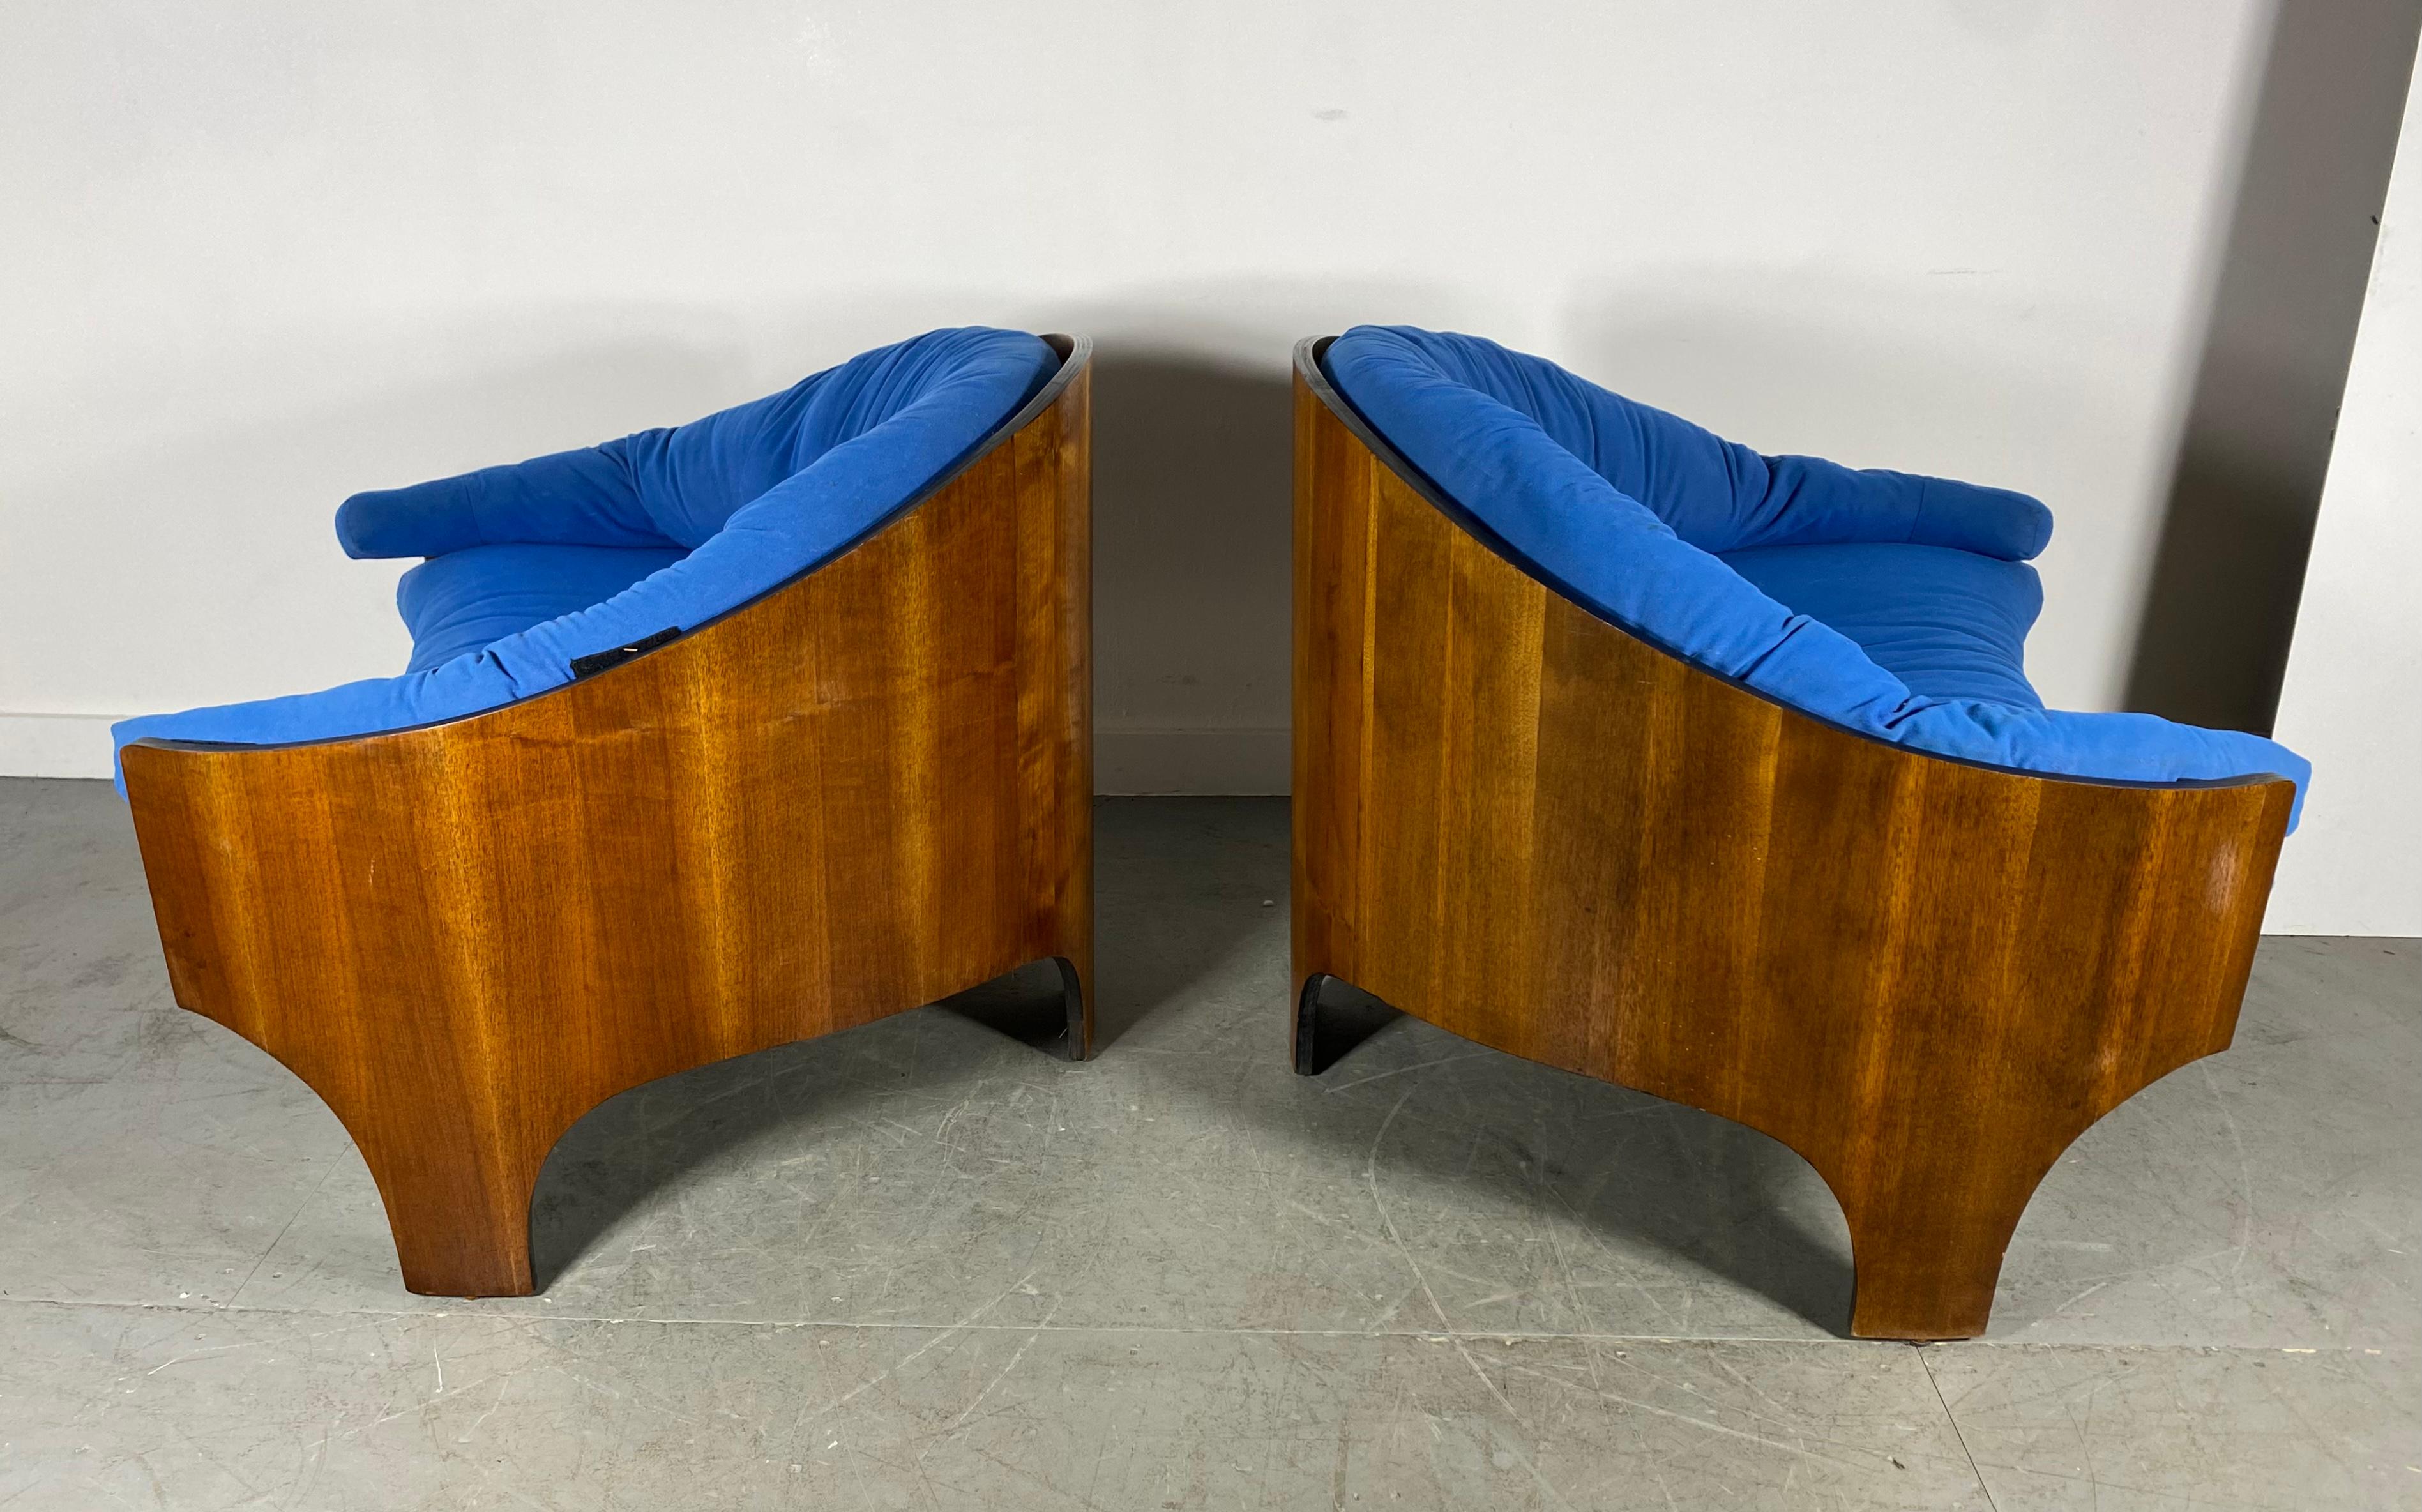 Henry Glass Intimate Island Lounge Chairs Stunning Moulded Walnut In Good Condition For Sale In Buffalo, NY